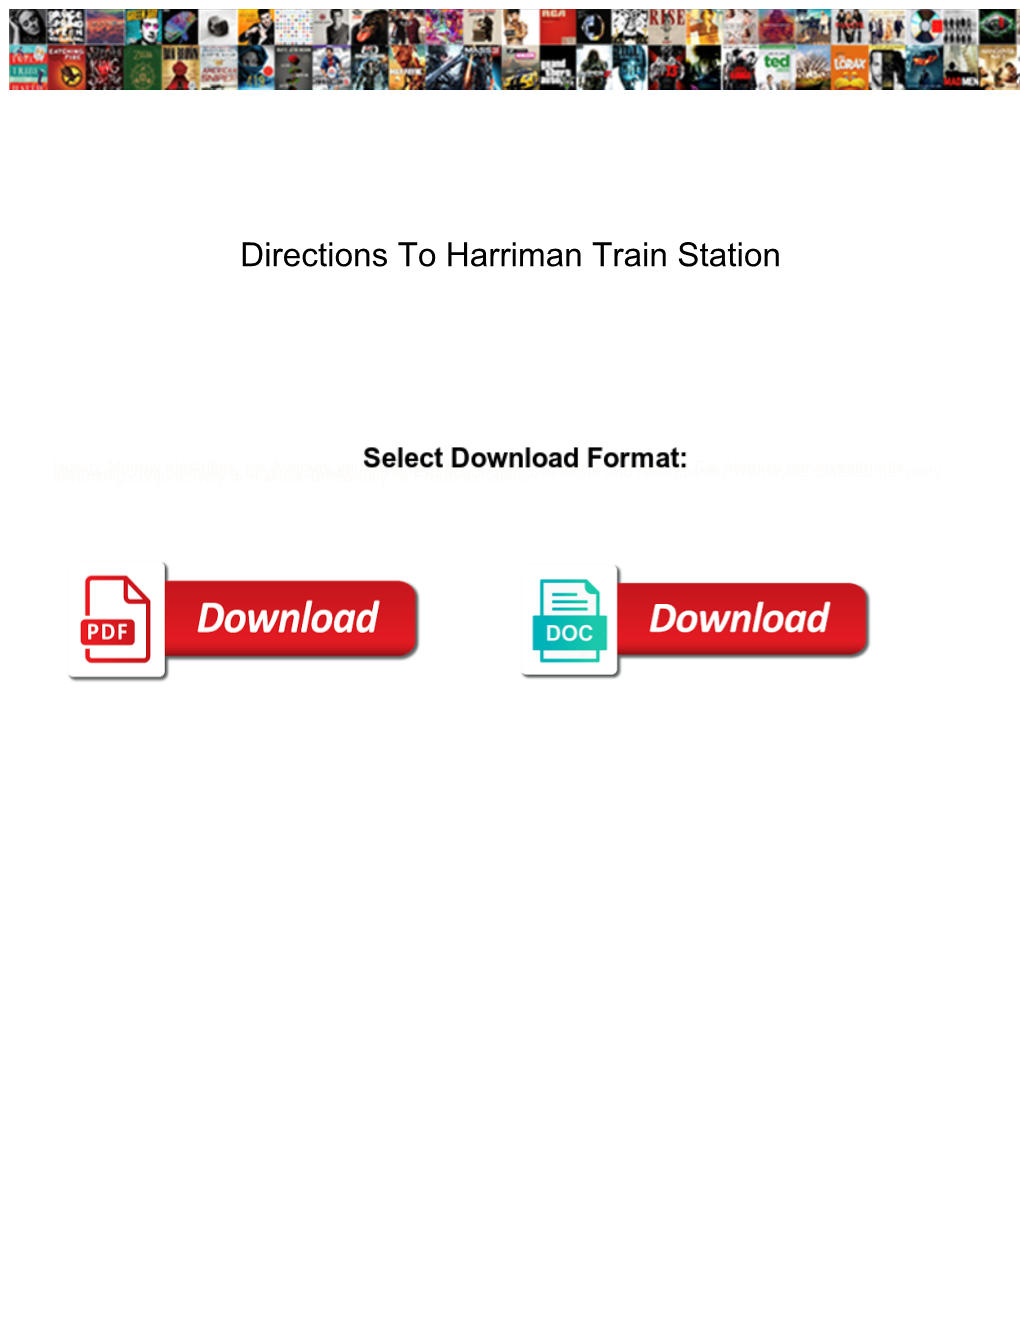 Directions to Harriman Train Station